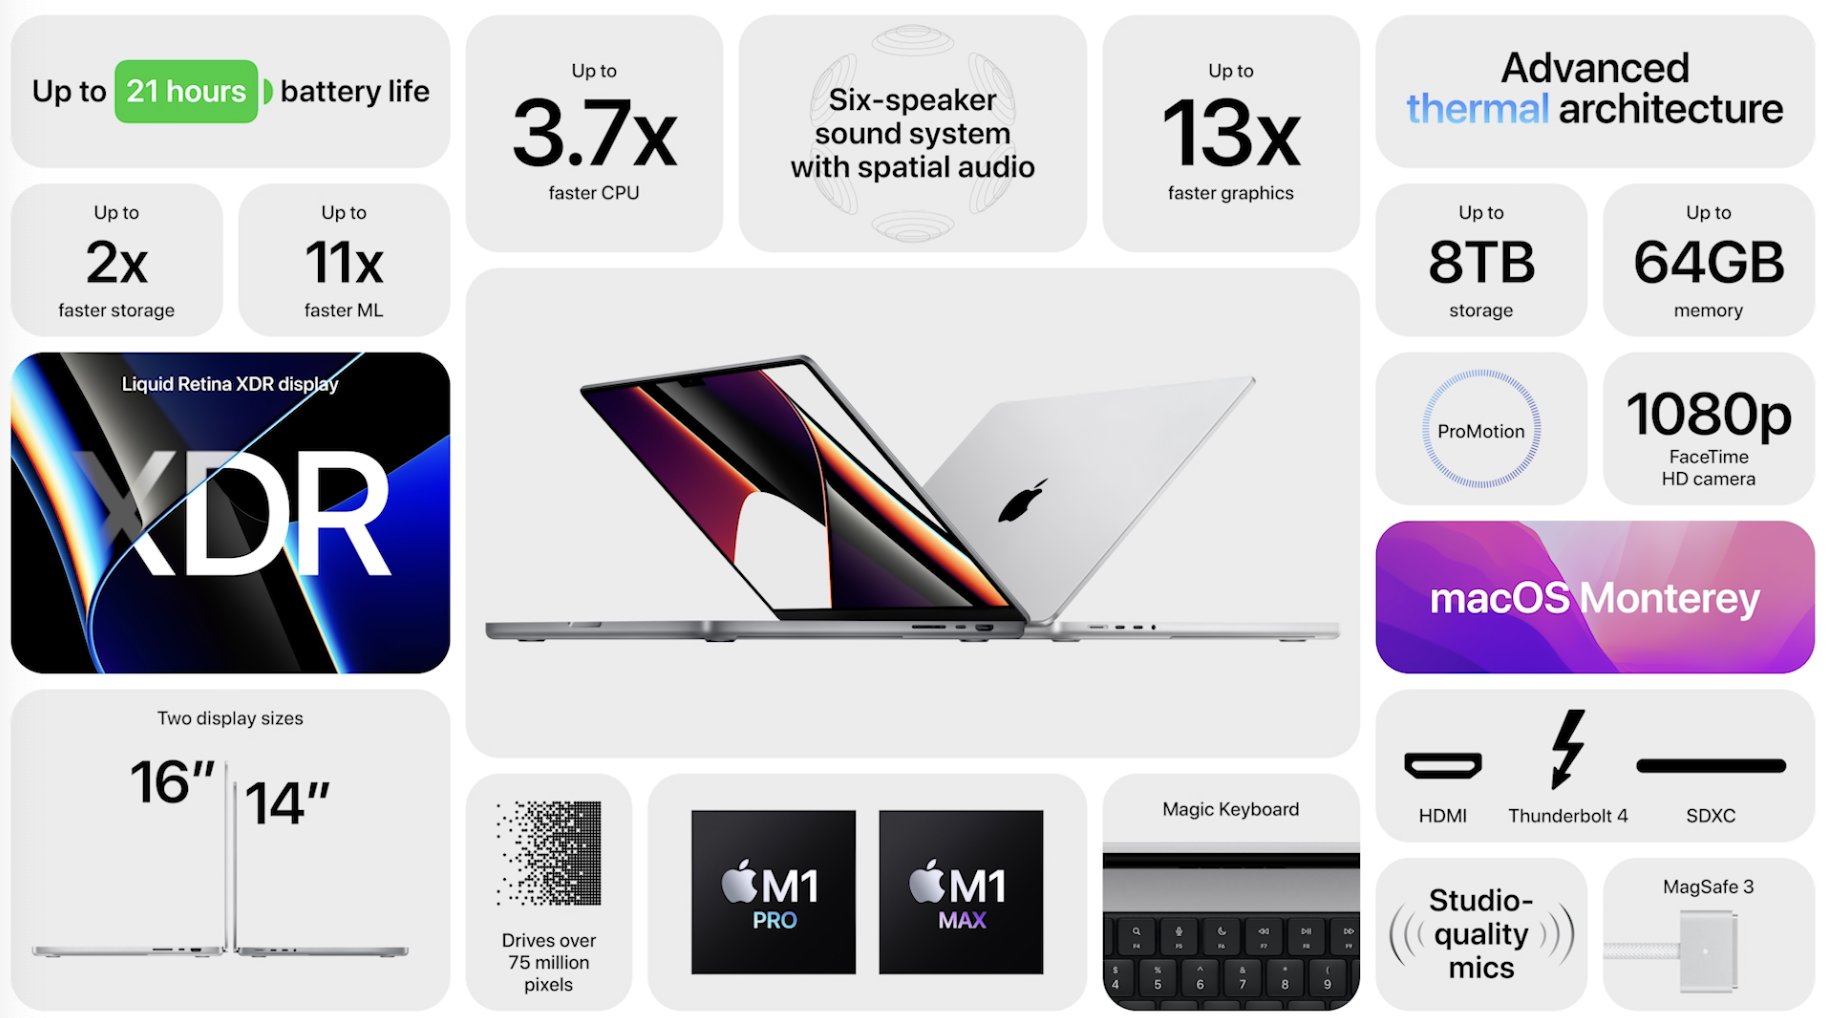 Summary of what's new for the new 2021 MacBook Pro